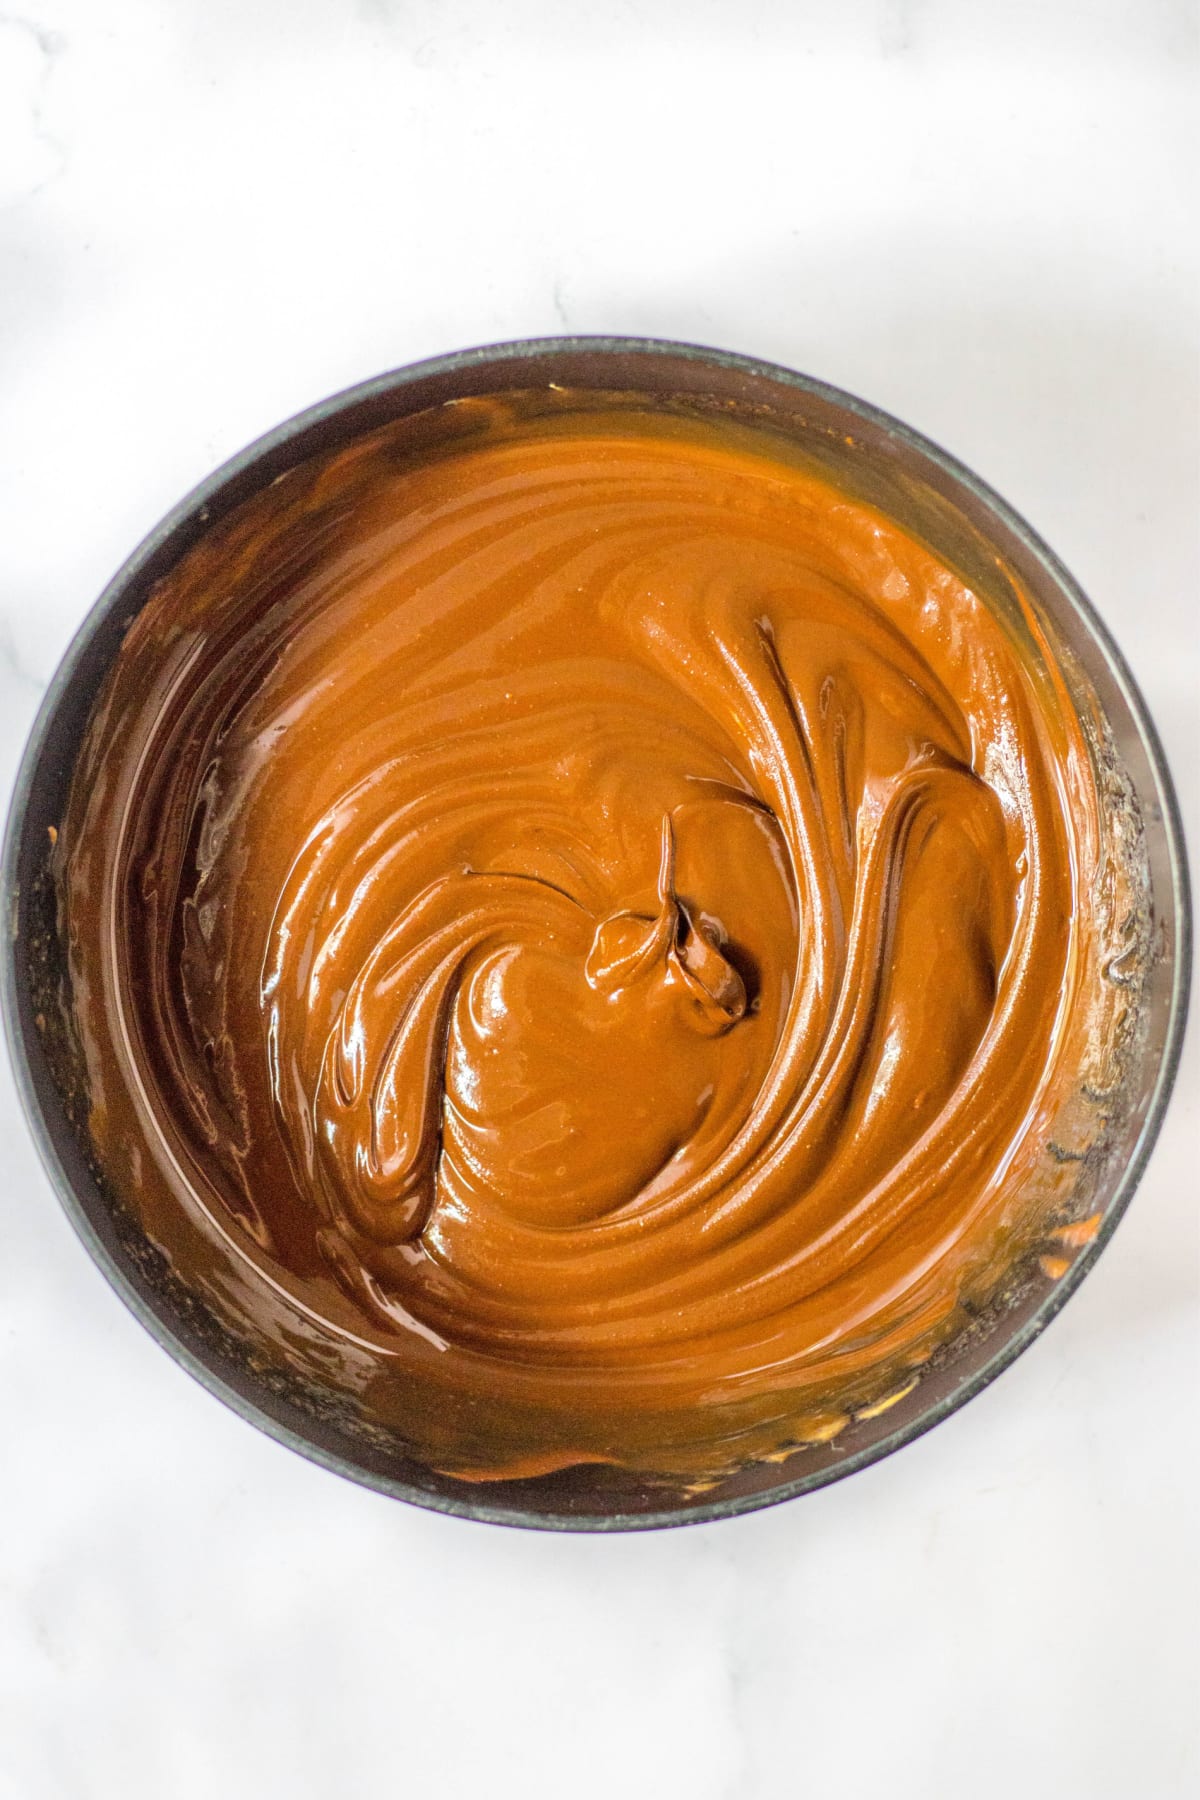 Chocolate and peanut butter mixture melted together in mixing bowl